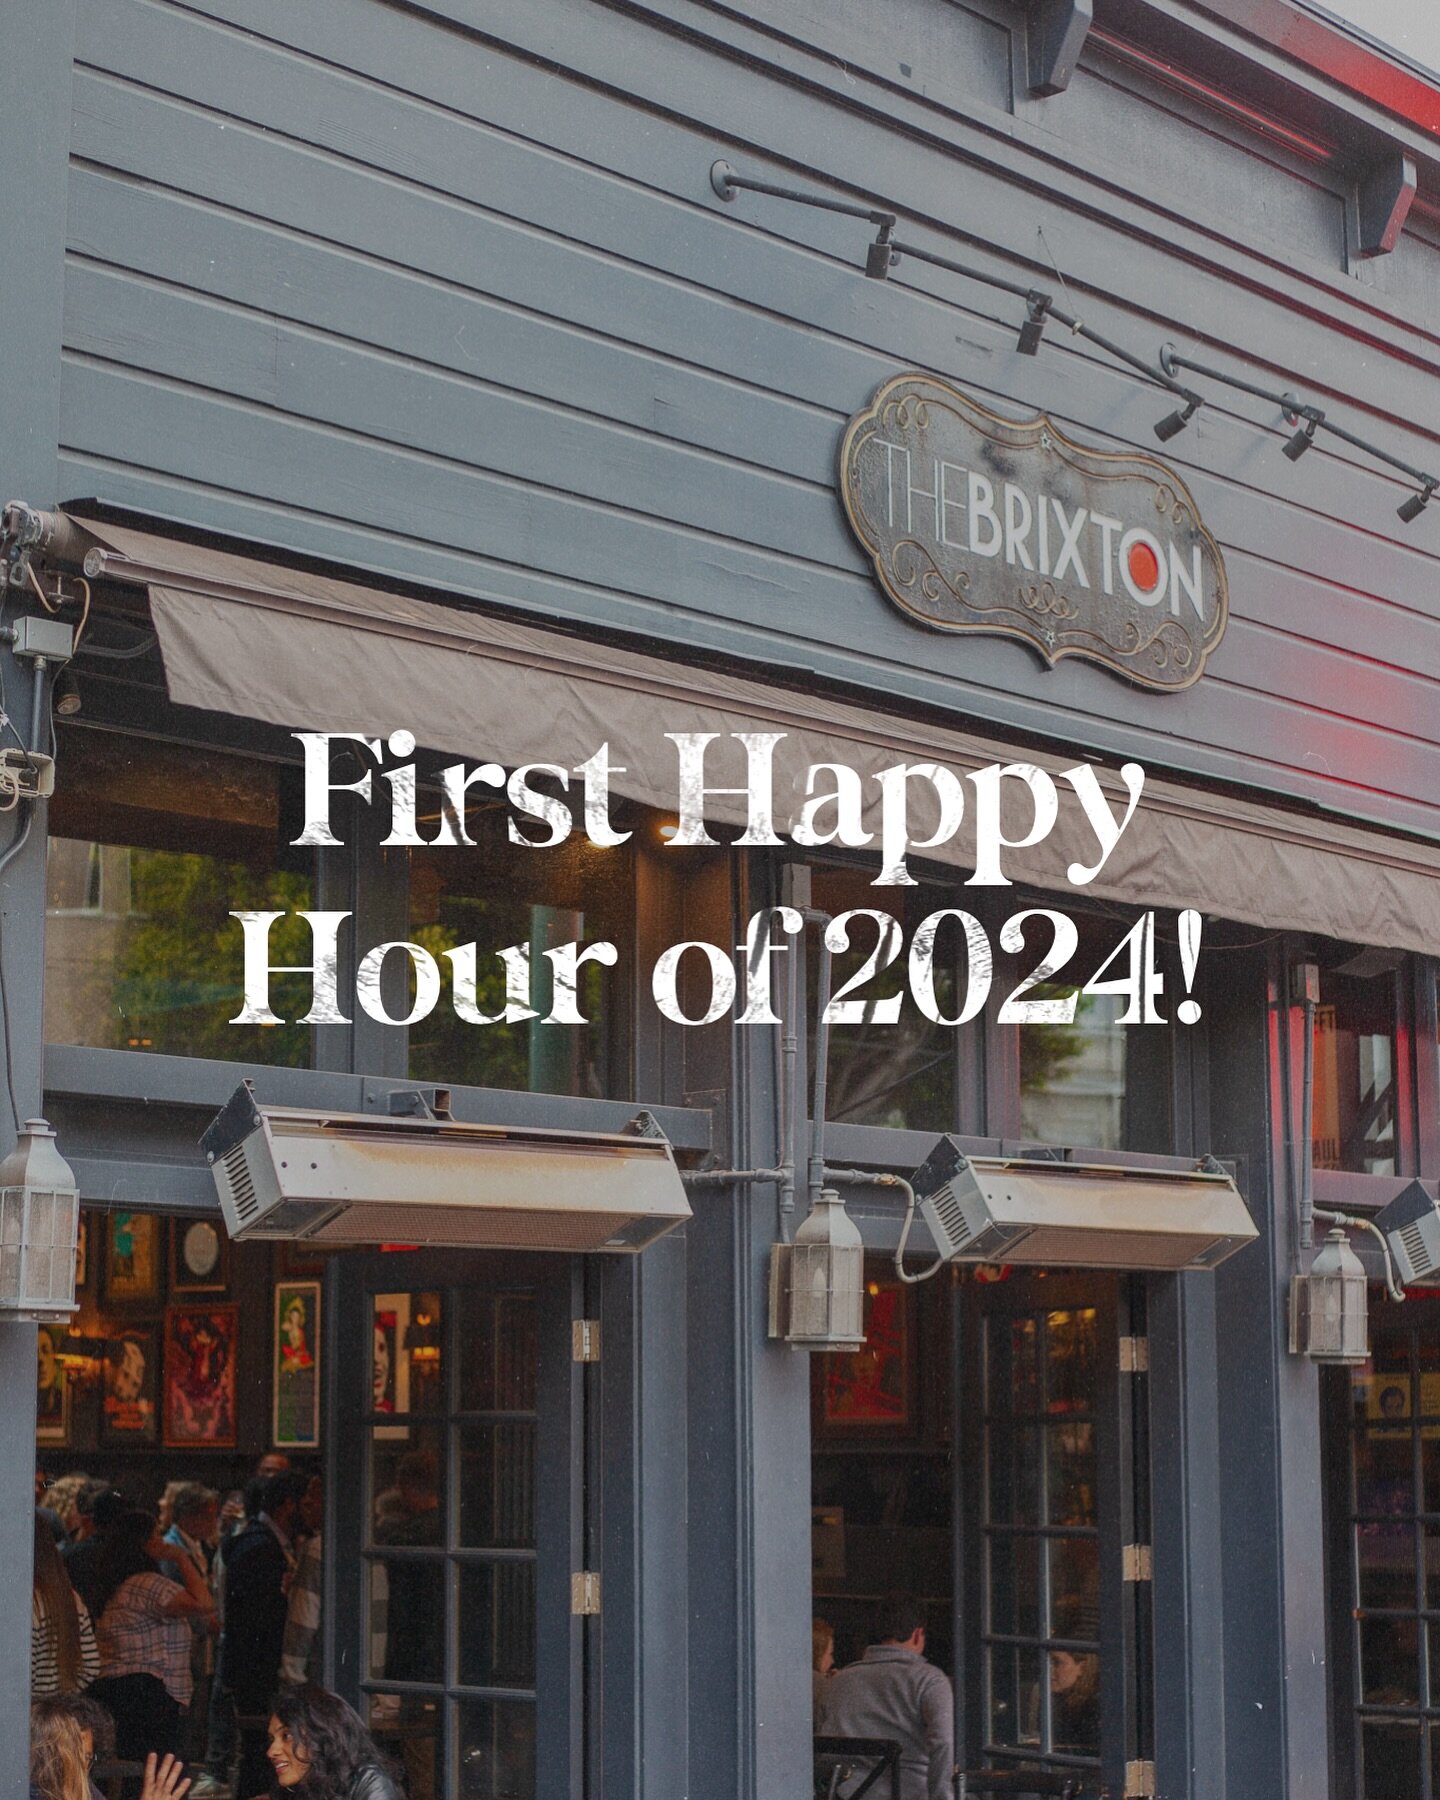 There&rsquo;s nothing wrong with being second, but who wouldn&rsquo;t want to be first!?! 😉 Come join us this Thursday at @brixtonsf for our first happy hour of the year! Dry January or not, we&rsquo;re gathering for good conversation and expanding 